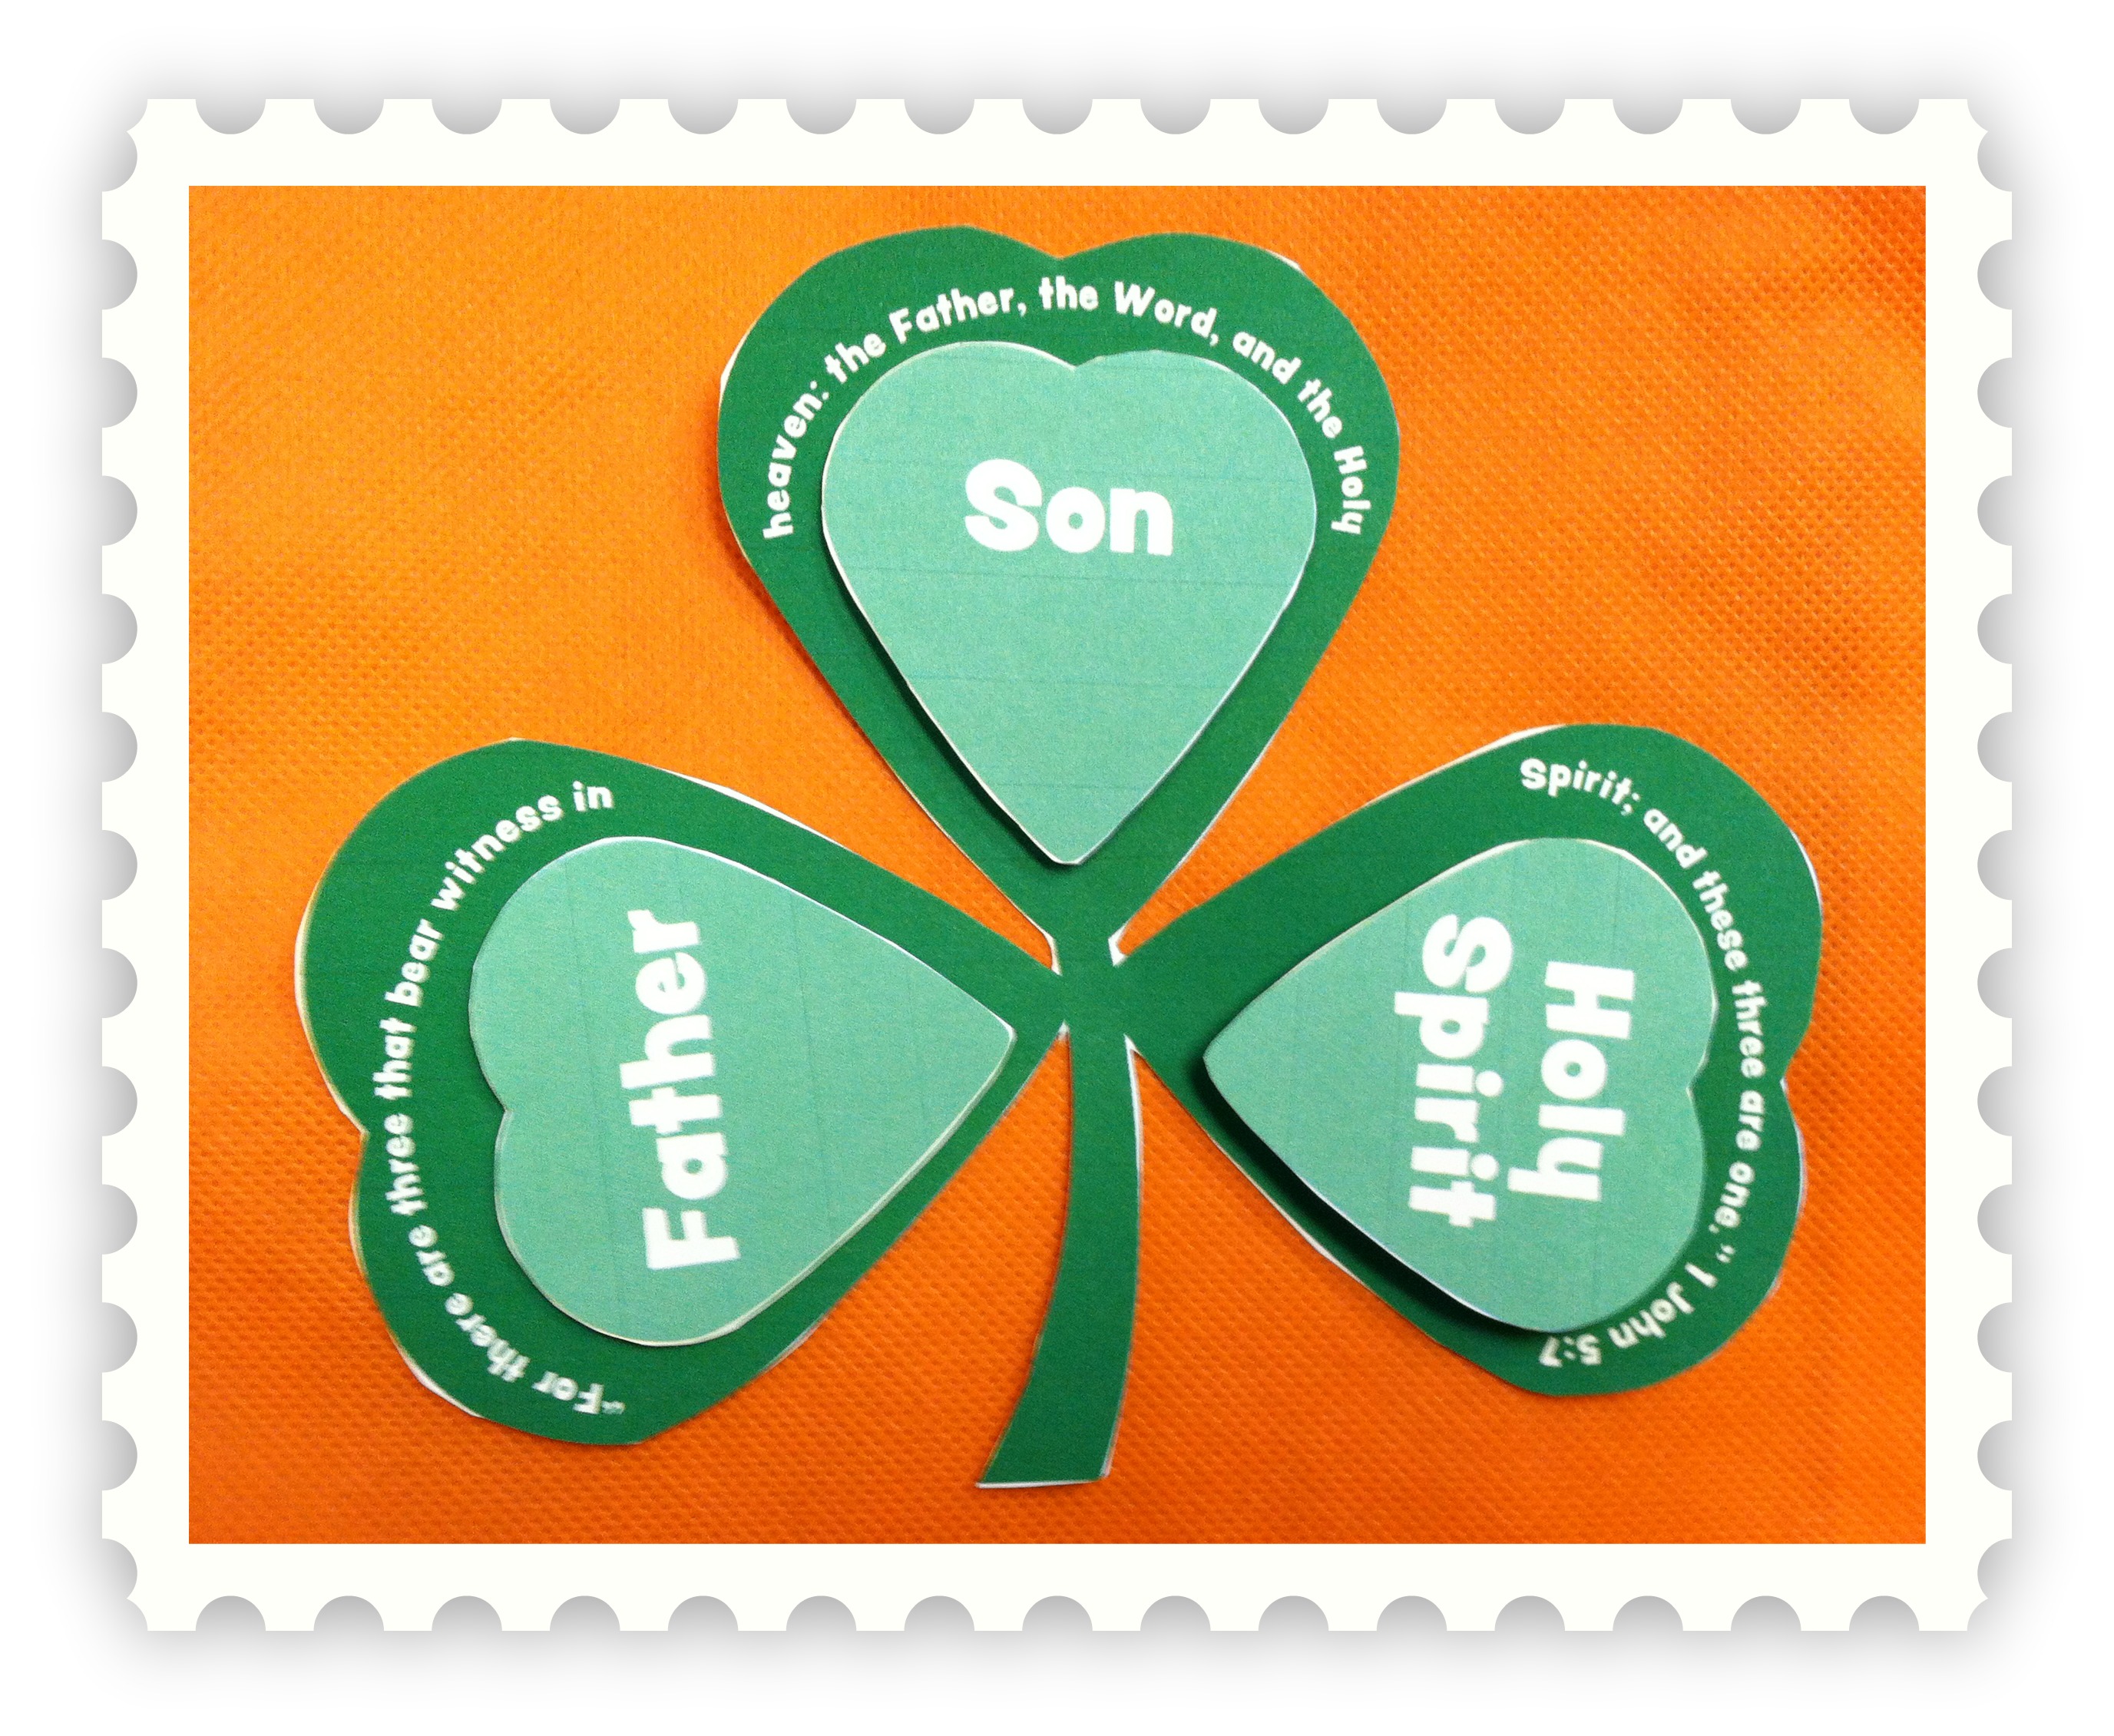 Trinity  So Teach About St  Patrick And God By Using This Shamrock To